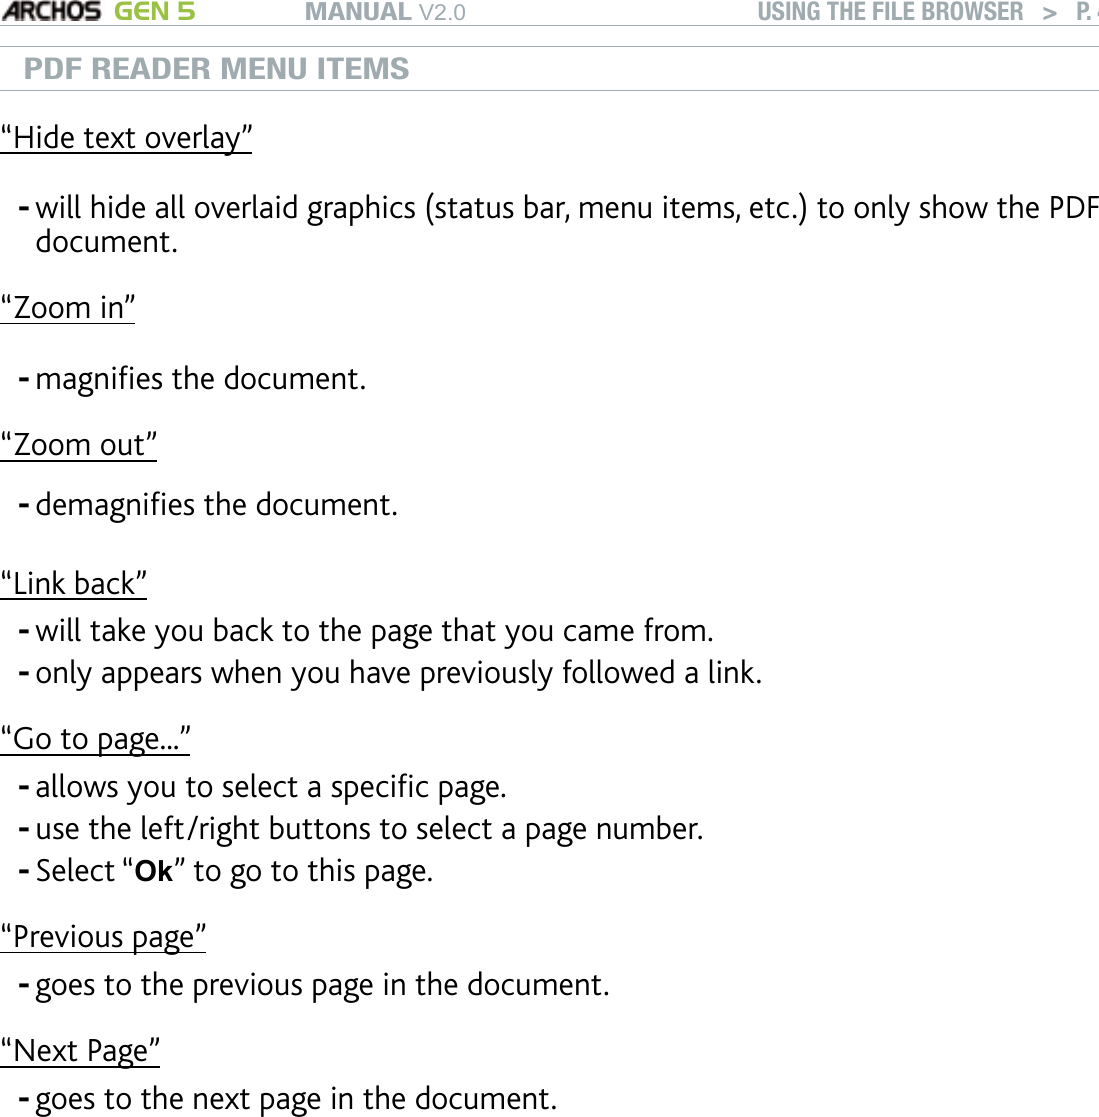 MANUAL V2.0 GEN 5 USING THE FILE BROWSER   &gt;   P. 41PDF READER MENU ITEMS“Hide text overlay”will hide all overlaid graphics (status bar, menu items, etc.) to only show the PDF document.-“Zoom in”magnies the document.-“Zoom out”demagnies the document.-“Link back”will take you back to the page that you came from.only appears when you have previously followed a link.--“Go to page...”allows you to select a specic page.use the left/right buttons to select a page number.Select “Ok” to go to this page.---“Previous page”goes to the previous page in the document.-“Next Page”goes to the next page in the document.-